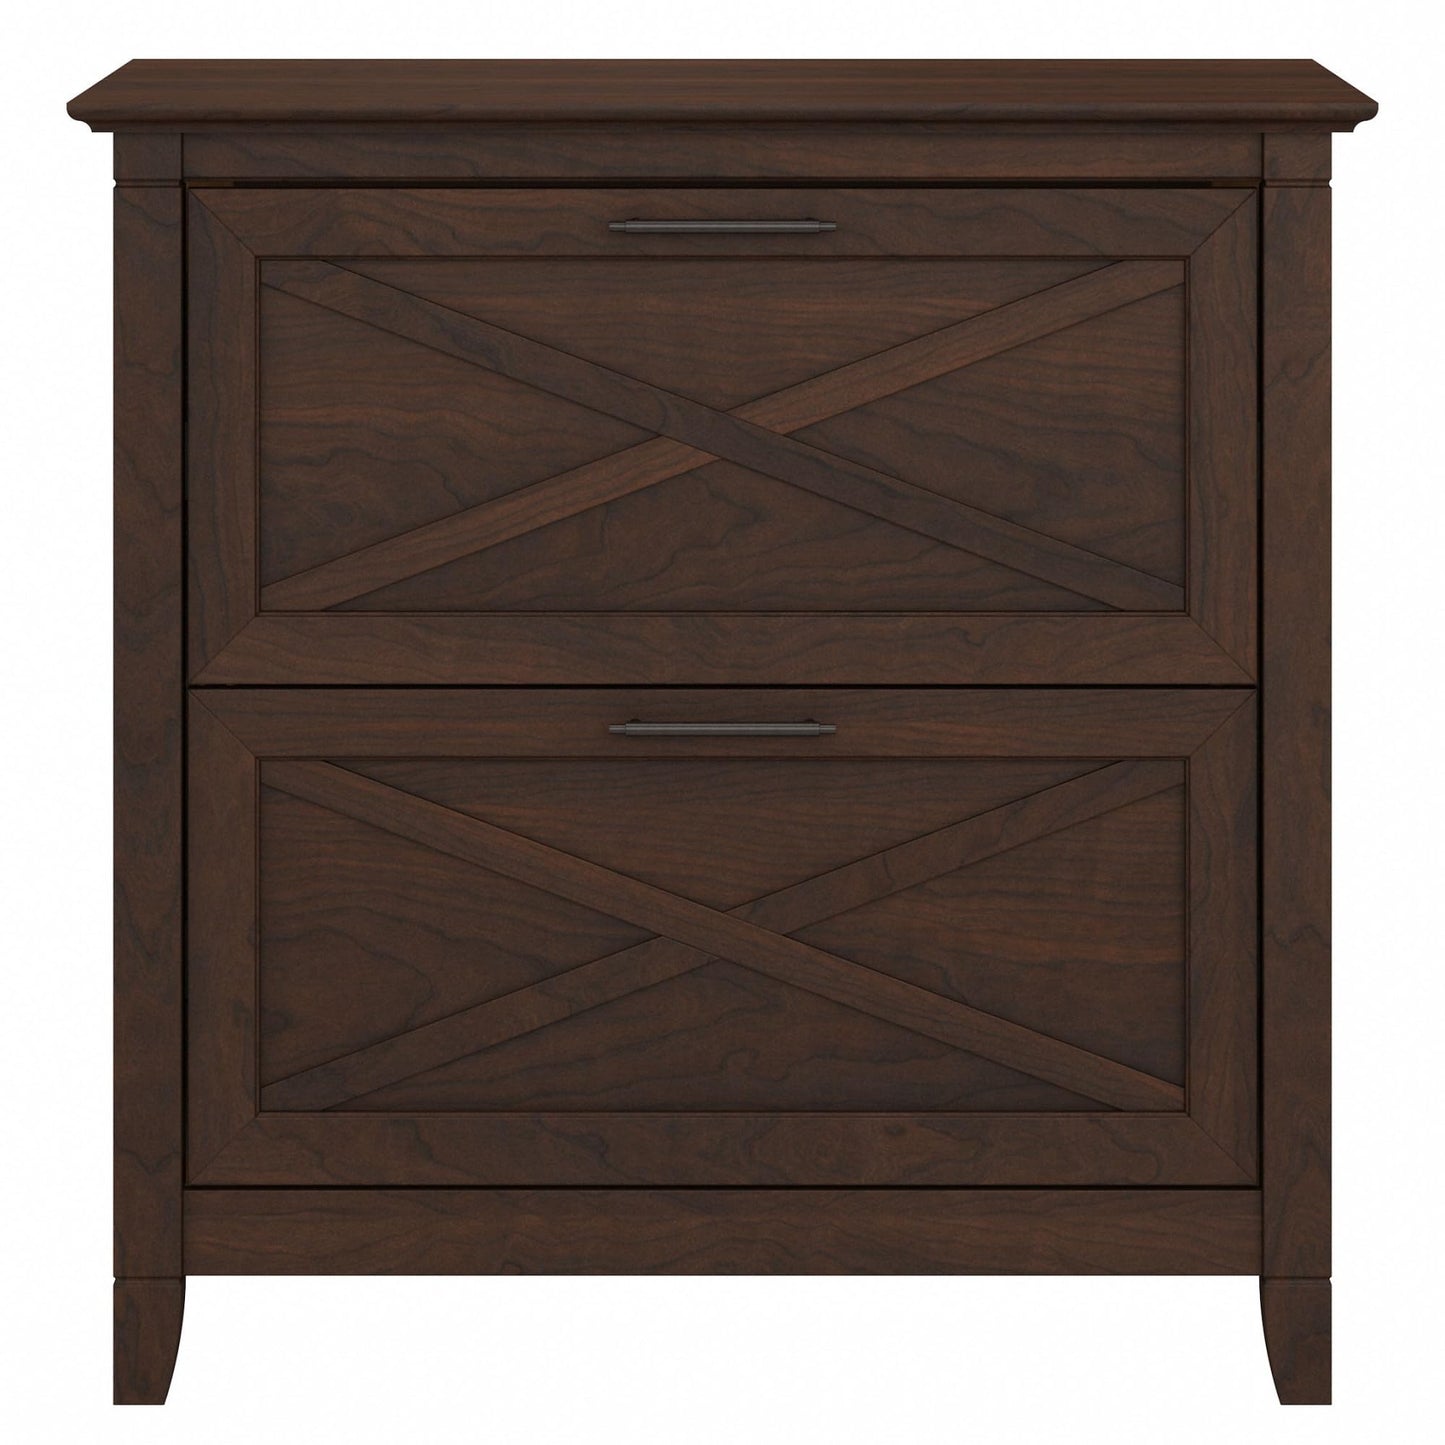 Bush Furniture Key West 2 Lateral File Cabinet | Document Storage for Home Office | Accent Chest with Drawers, 30"W x 20"D x 30"H, Bing Cherry